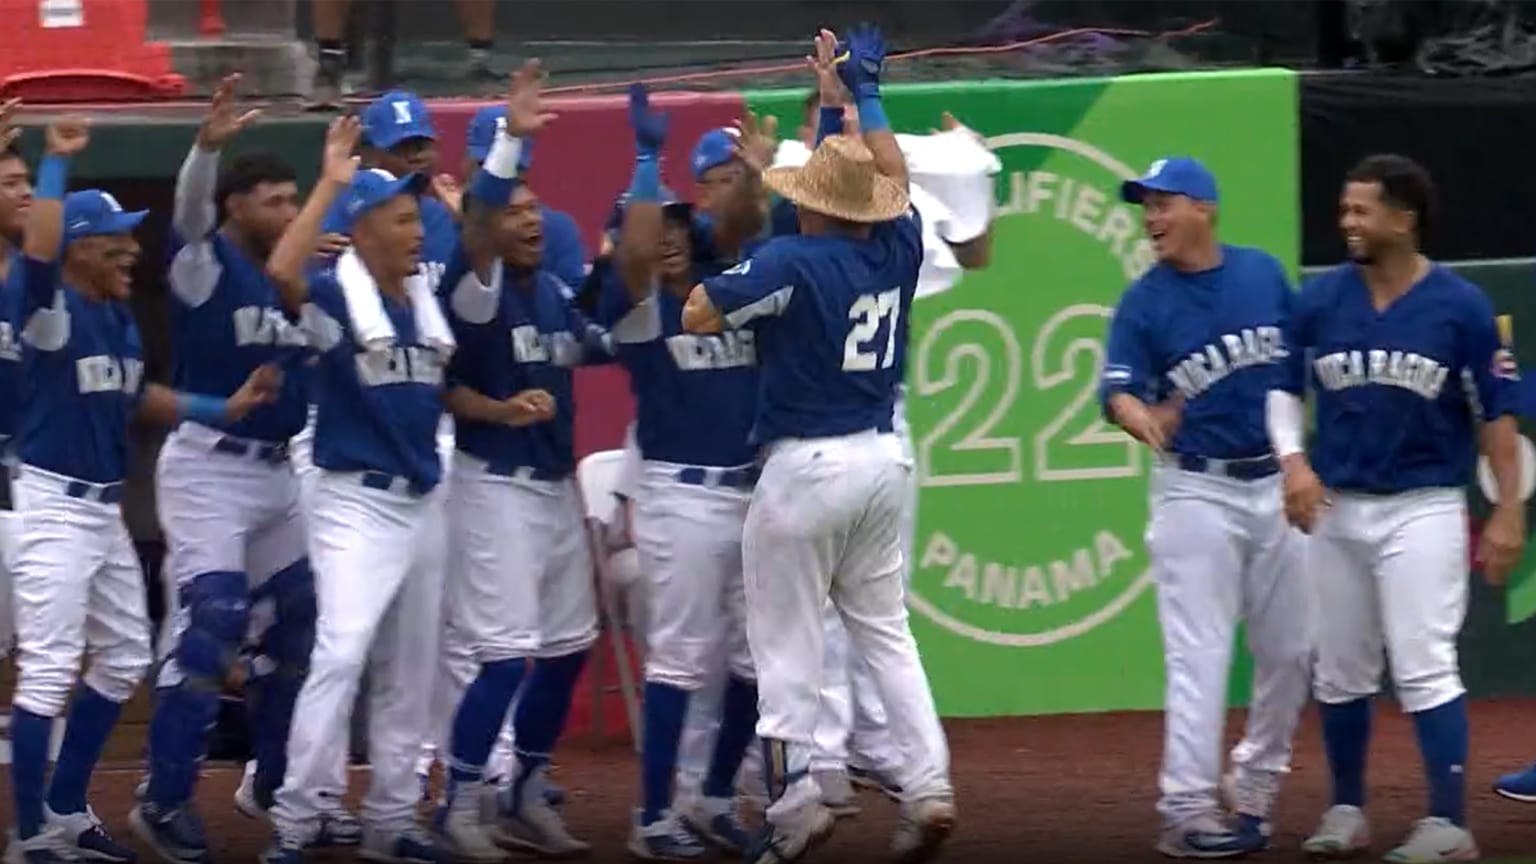 Players for Nicaragua celebrate after a home run